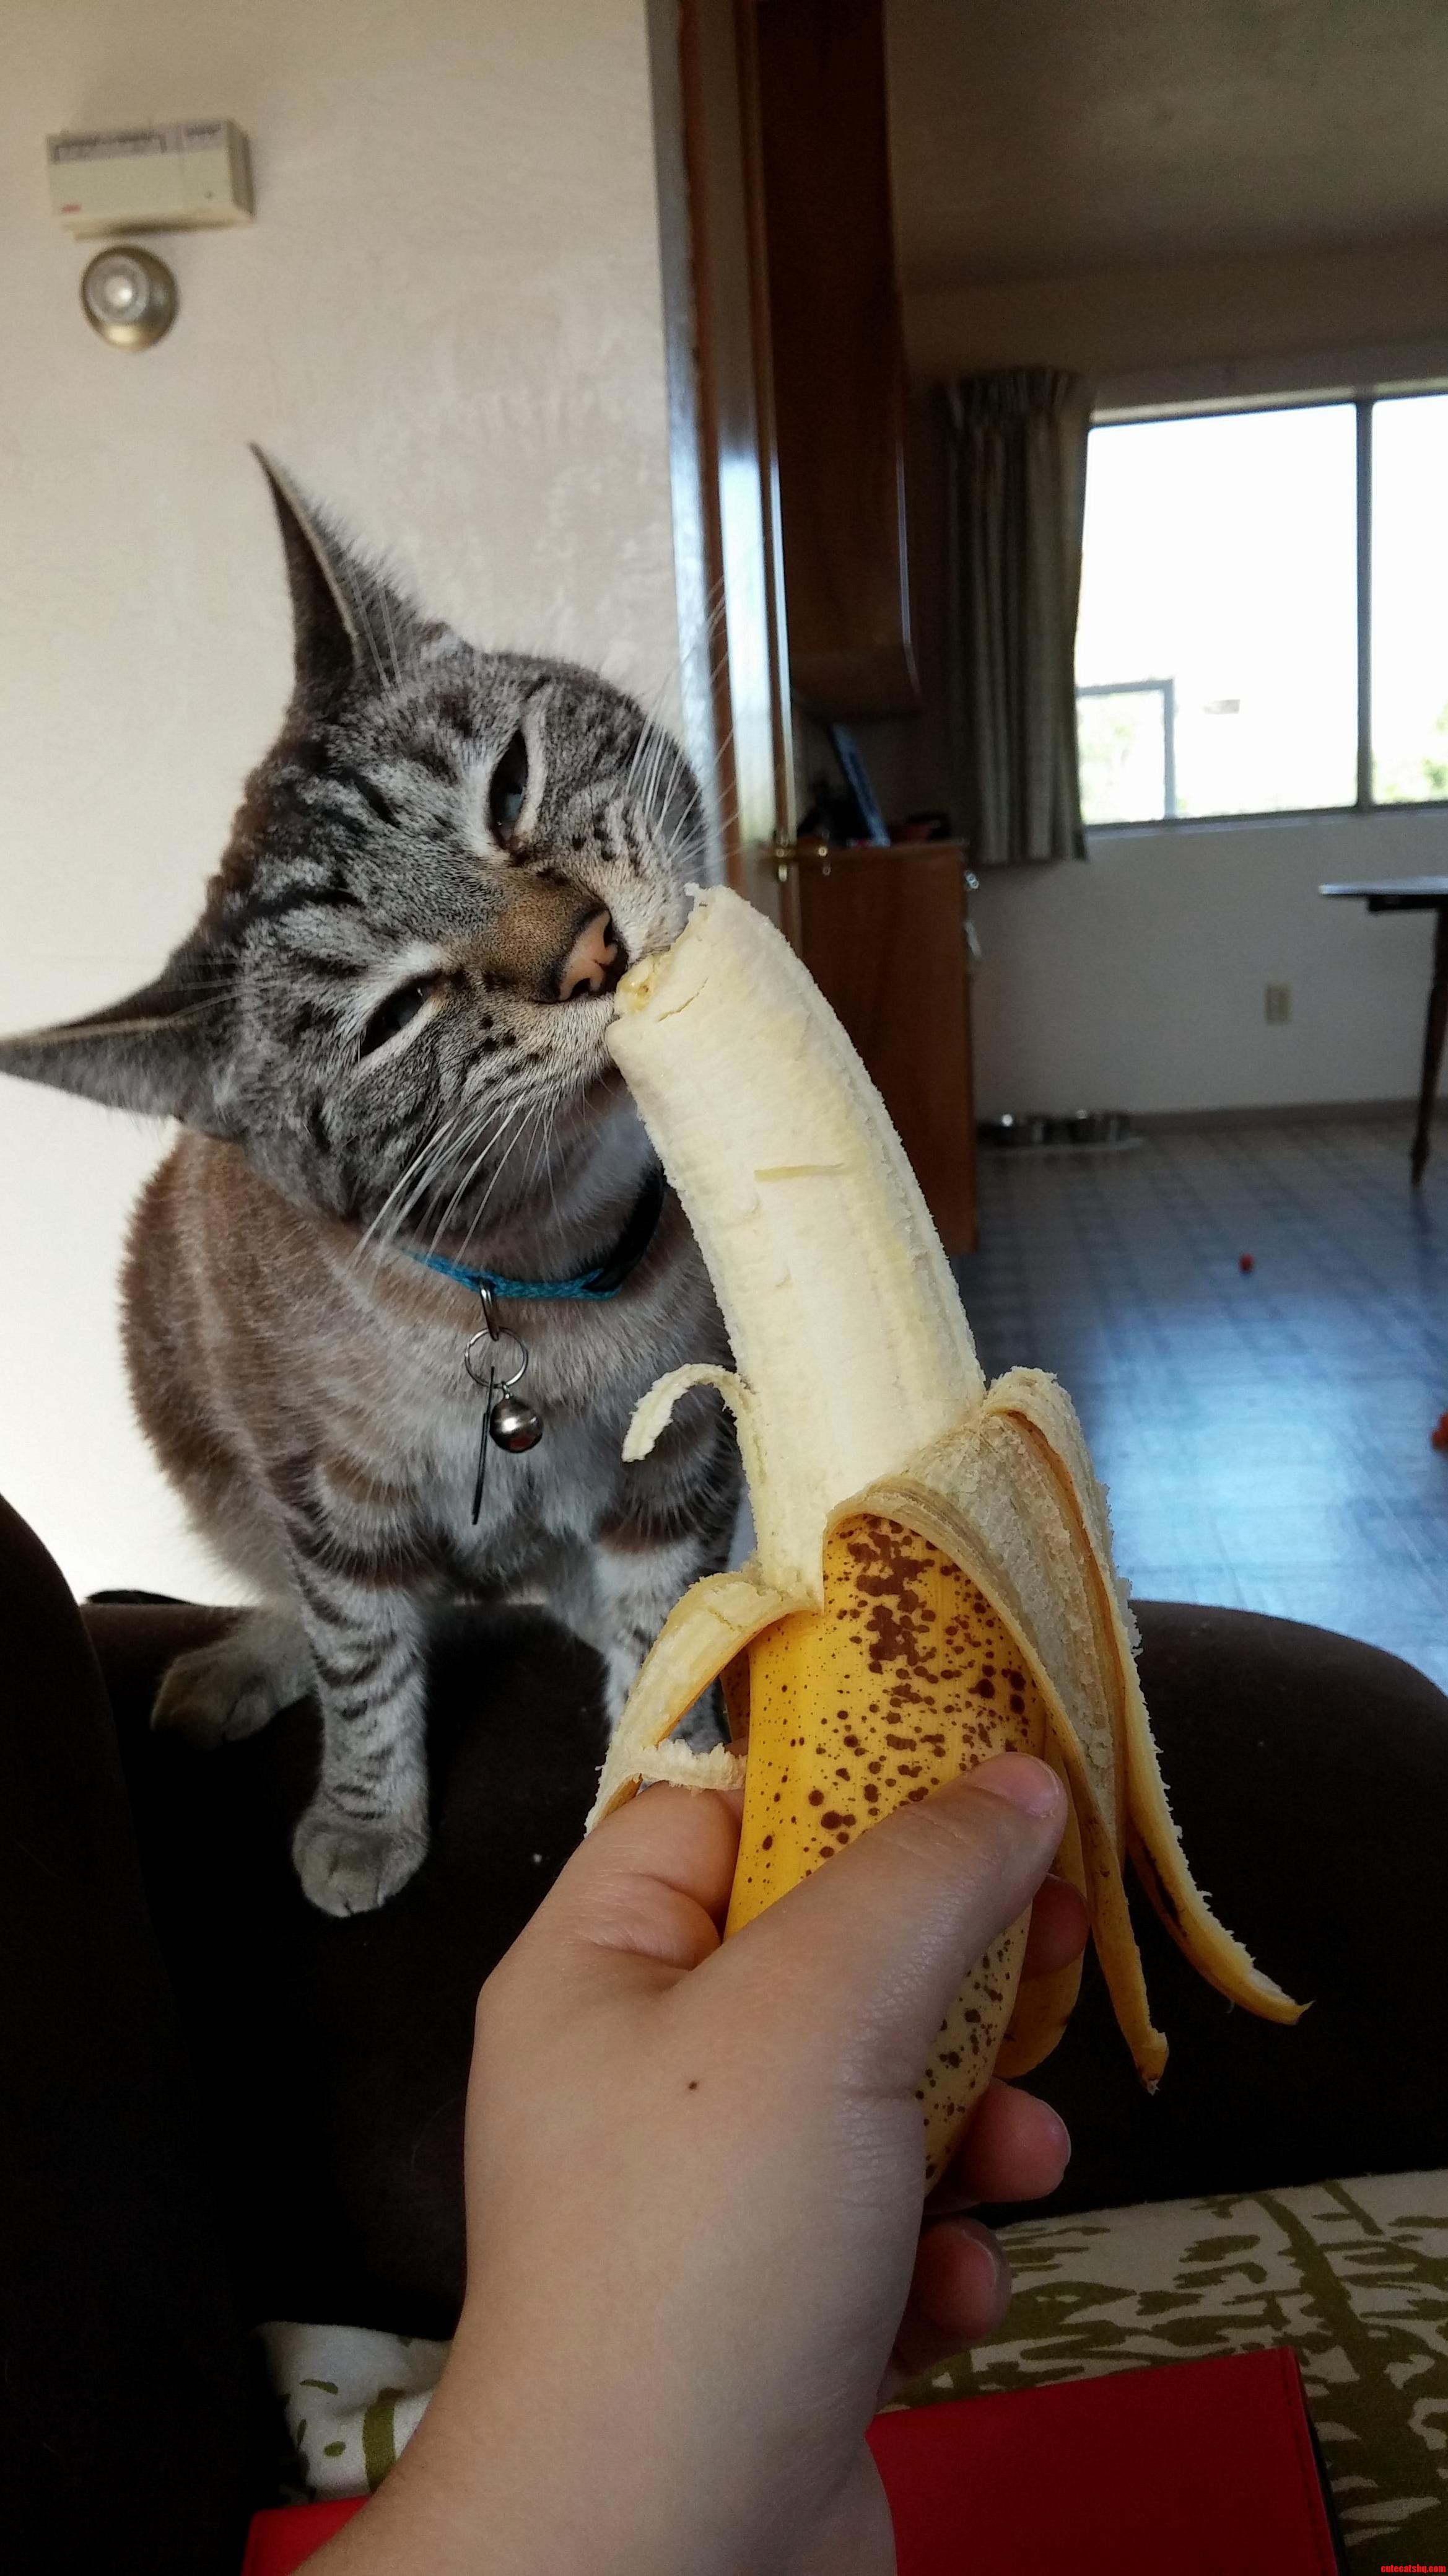 As Requested Here Is Monkey Eating A Banana.